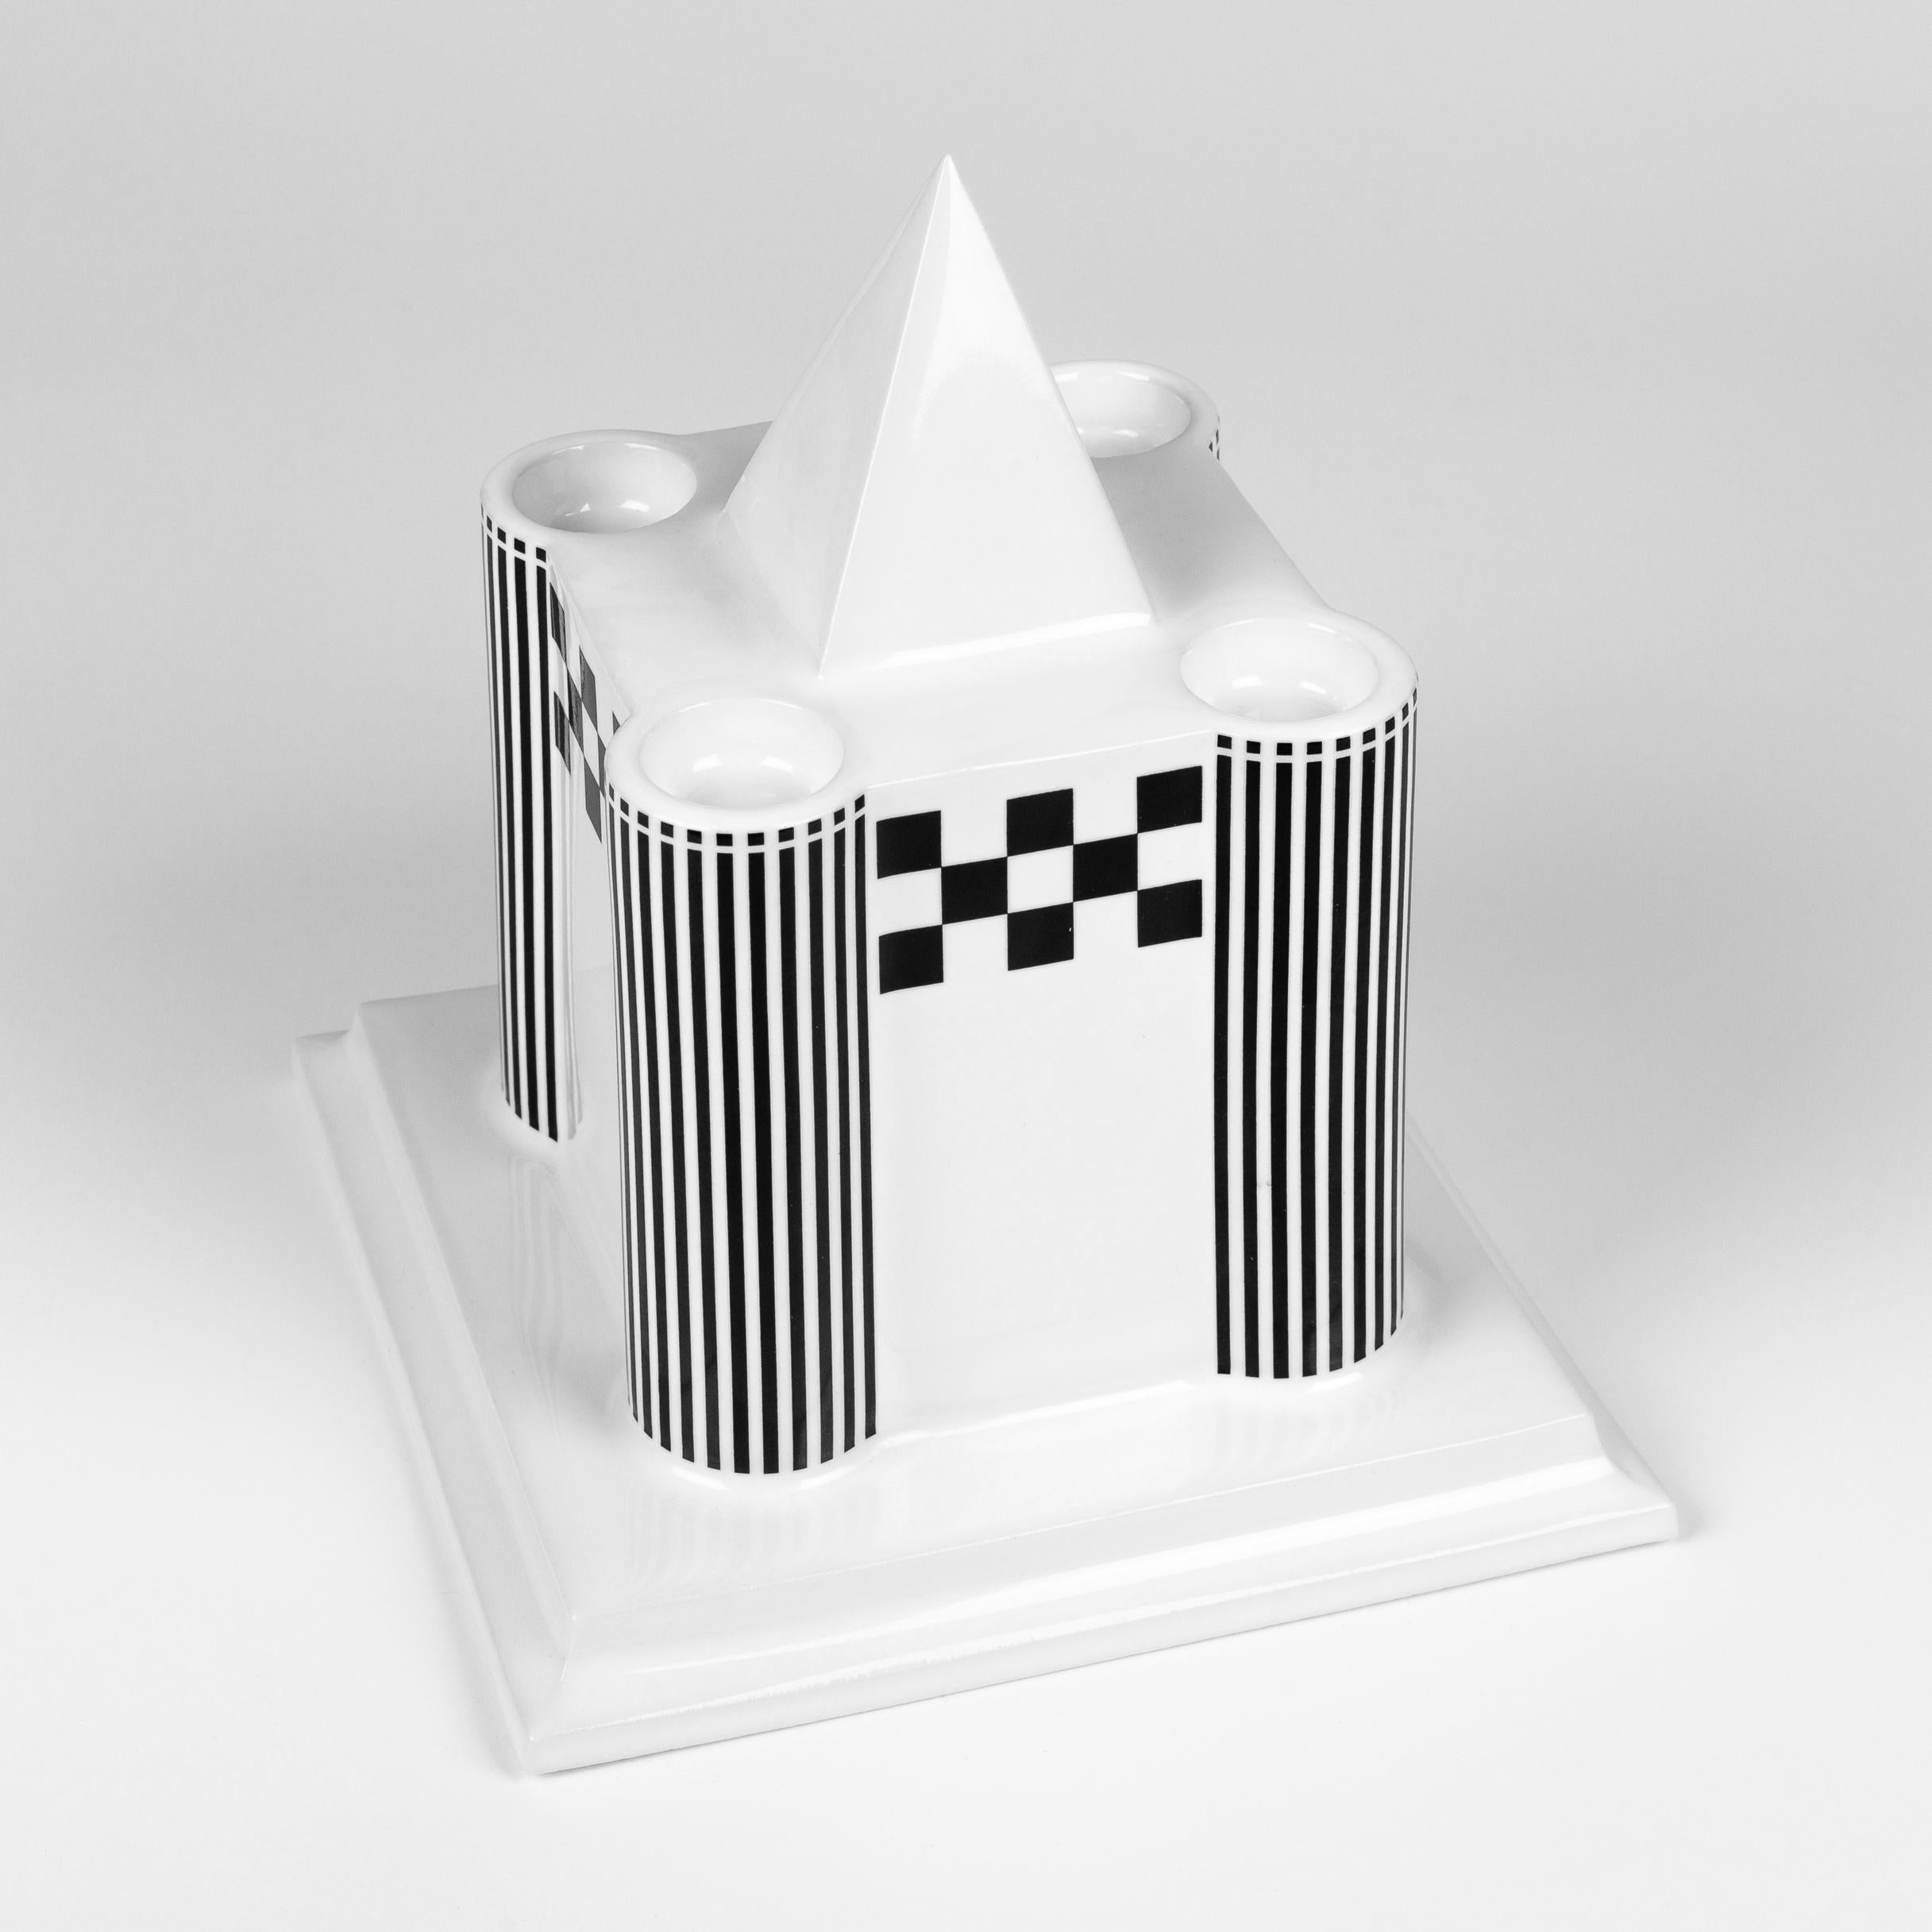 Austrian designer Heide Warlamis is the creator of this architectural postmodern candleholder for four candles made in the 1980s. It is part of her cult series called the Vienna Collection where each piece refers to building types. In this piece,